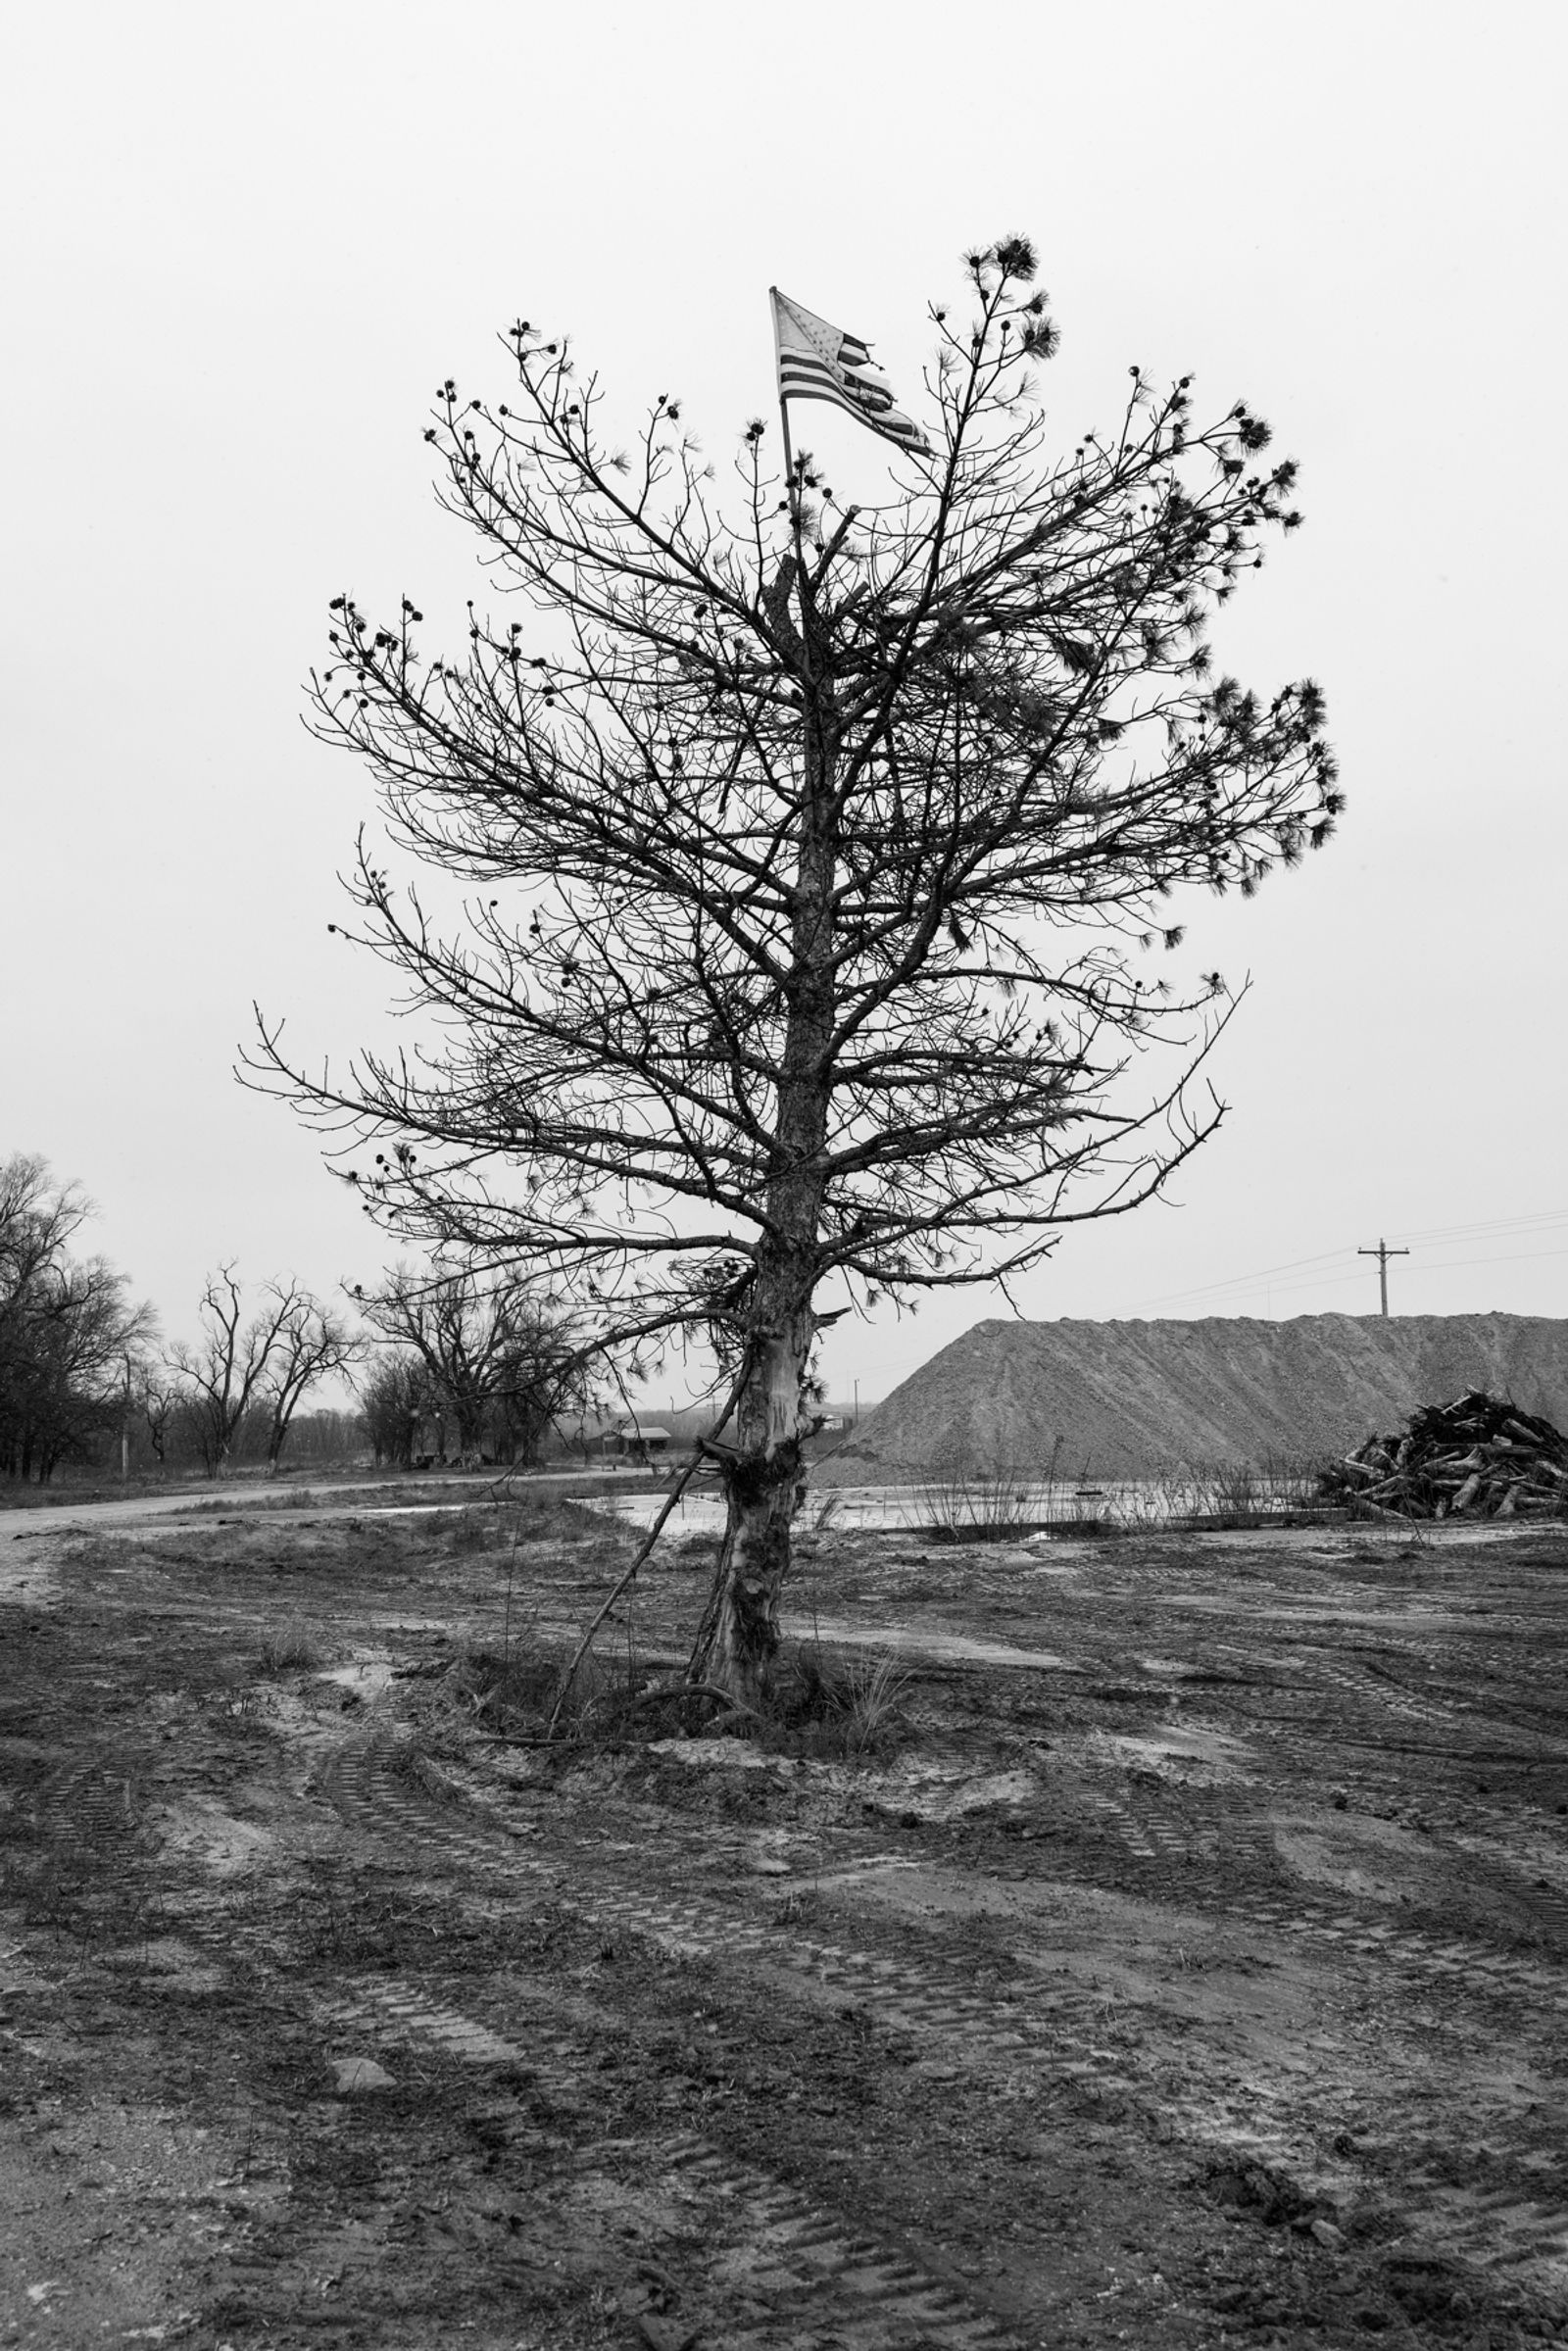 Richard Sharum Documents the Often Overlooked Midwest of the US